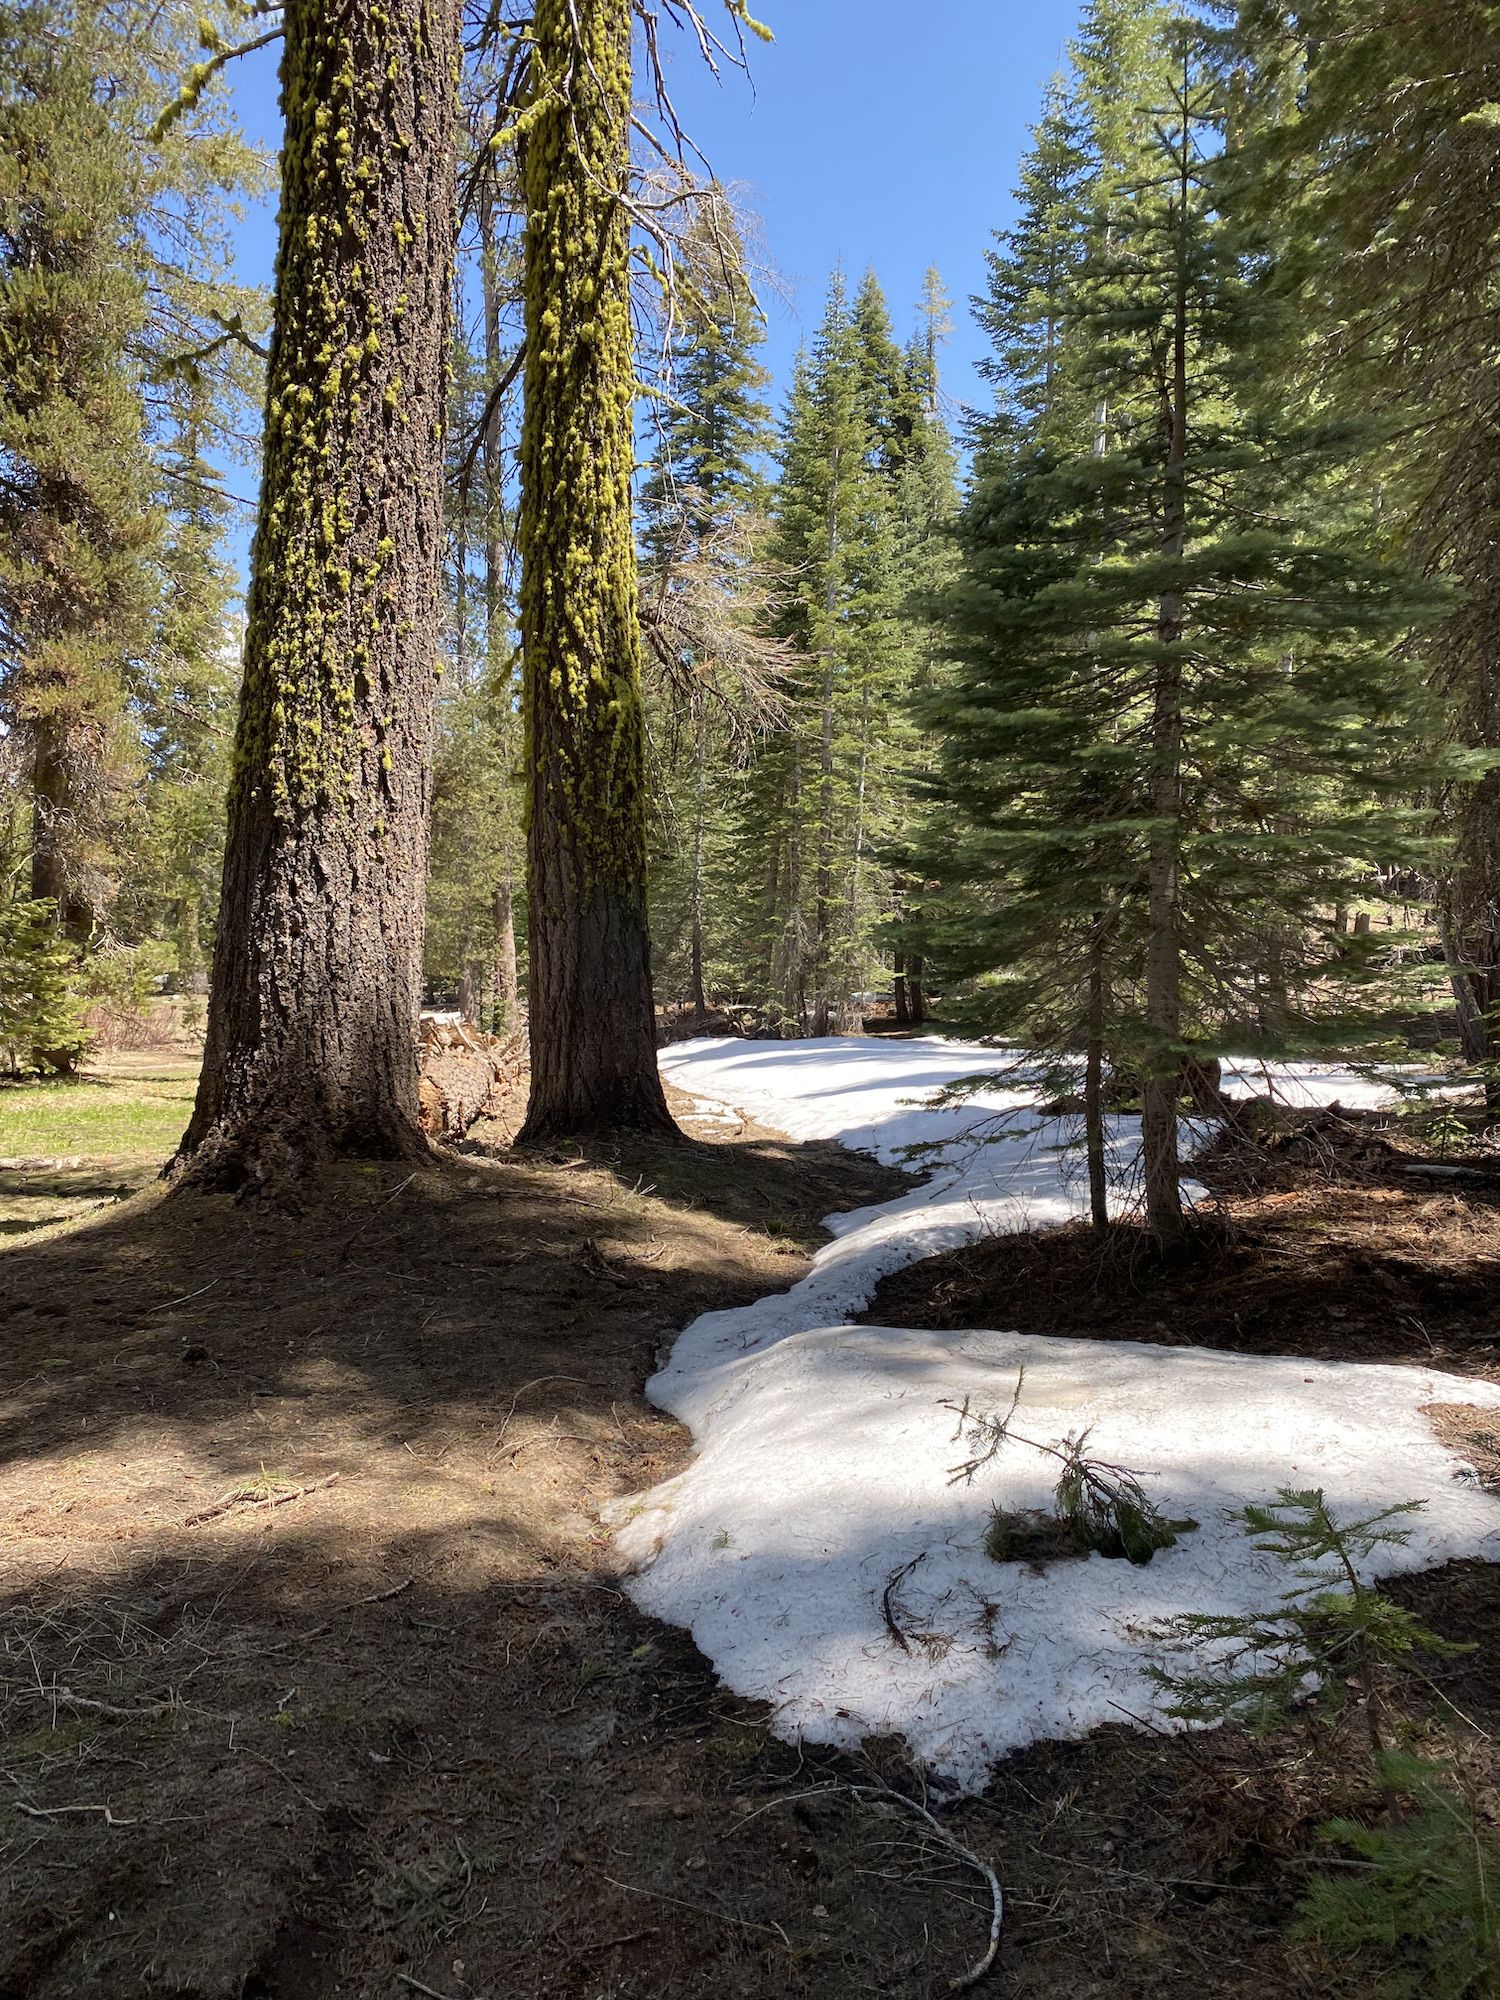 A snow patch in the shade below trees.